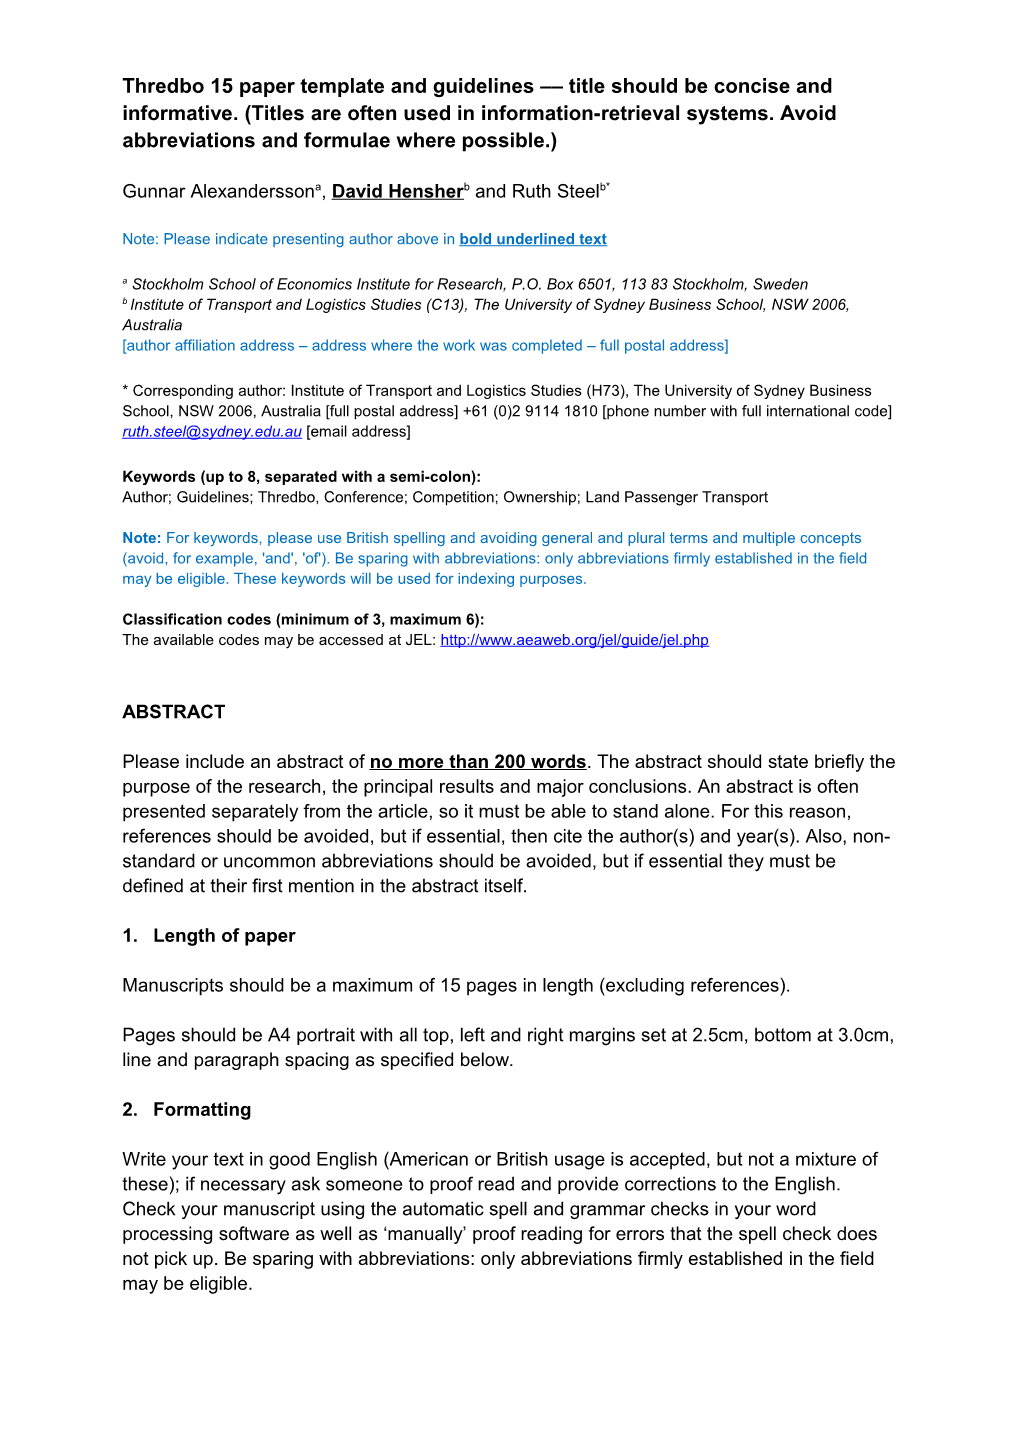 Thredbo 15 Paper Template and Guidelines